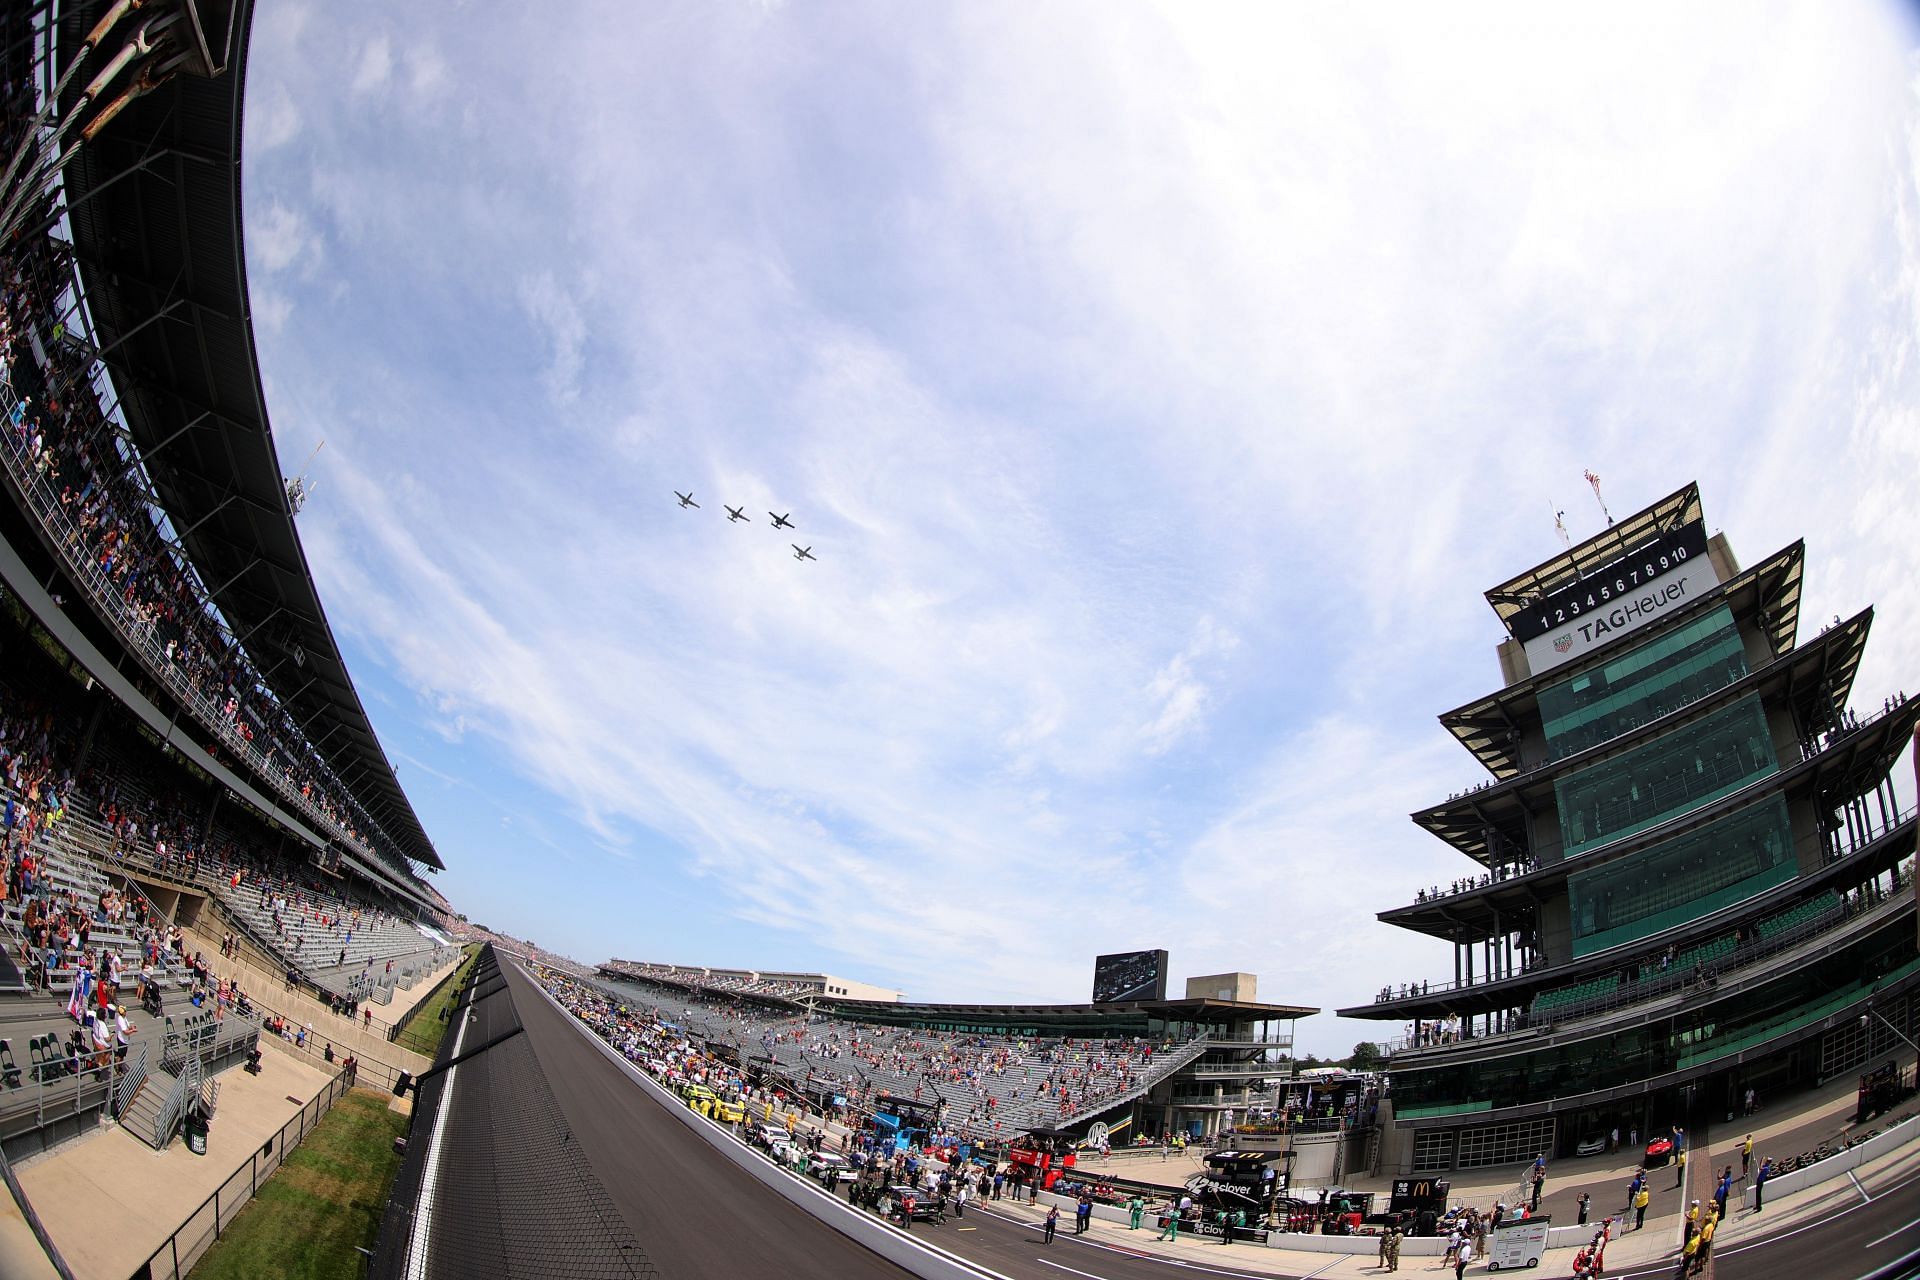 A general view of a flyover during pre-race ceremonies before the NASCAR Cup Series Verizon 200 at the Brickyard at Indianapolis Motor Speedway (Photo by Stacy Revere/Getty Images)